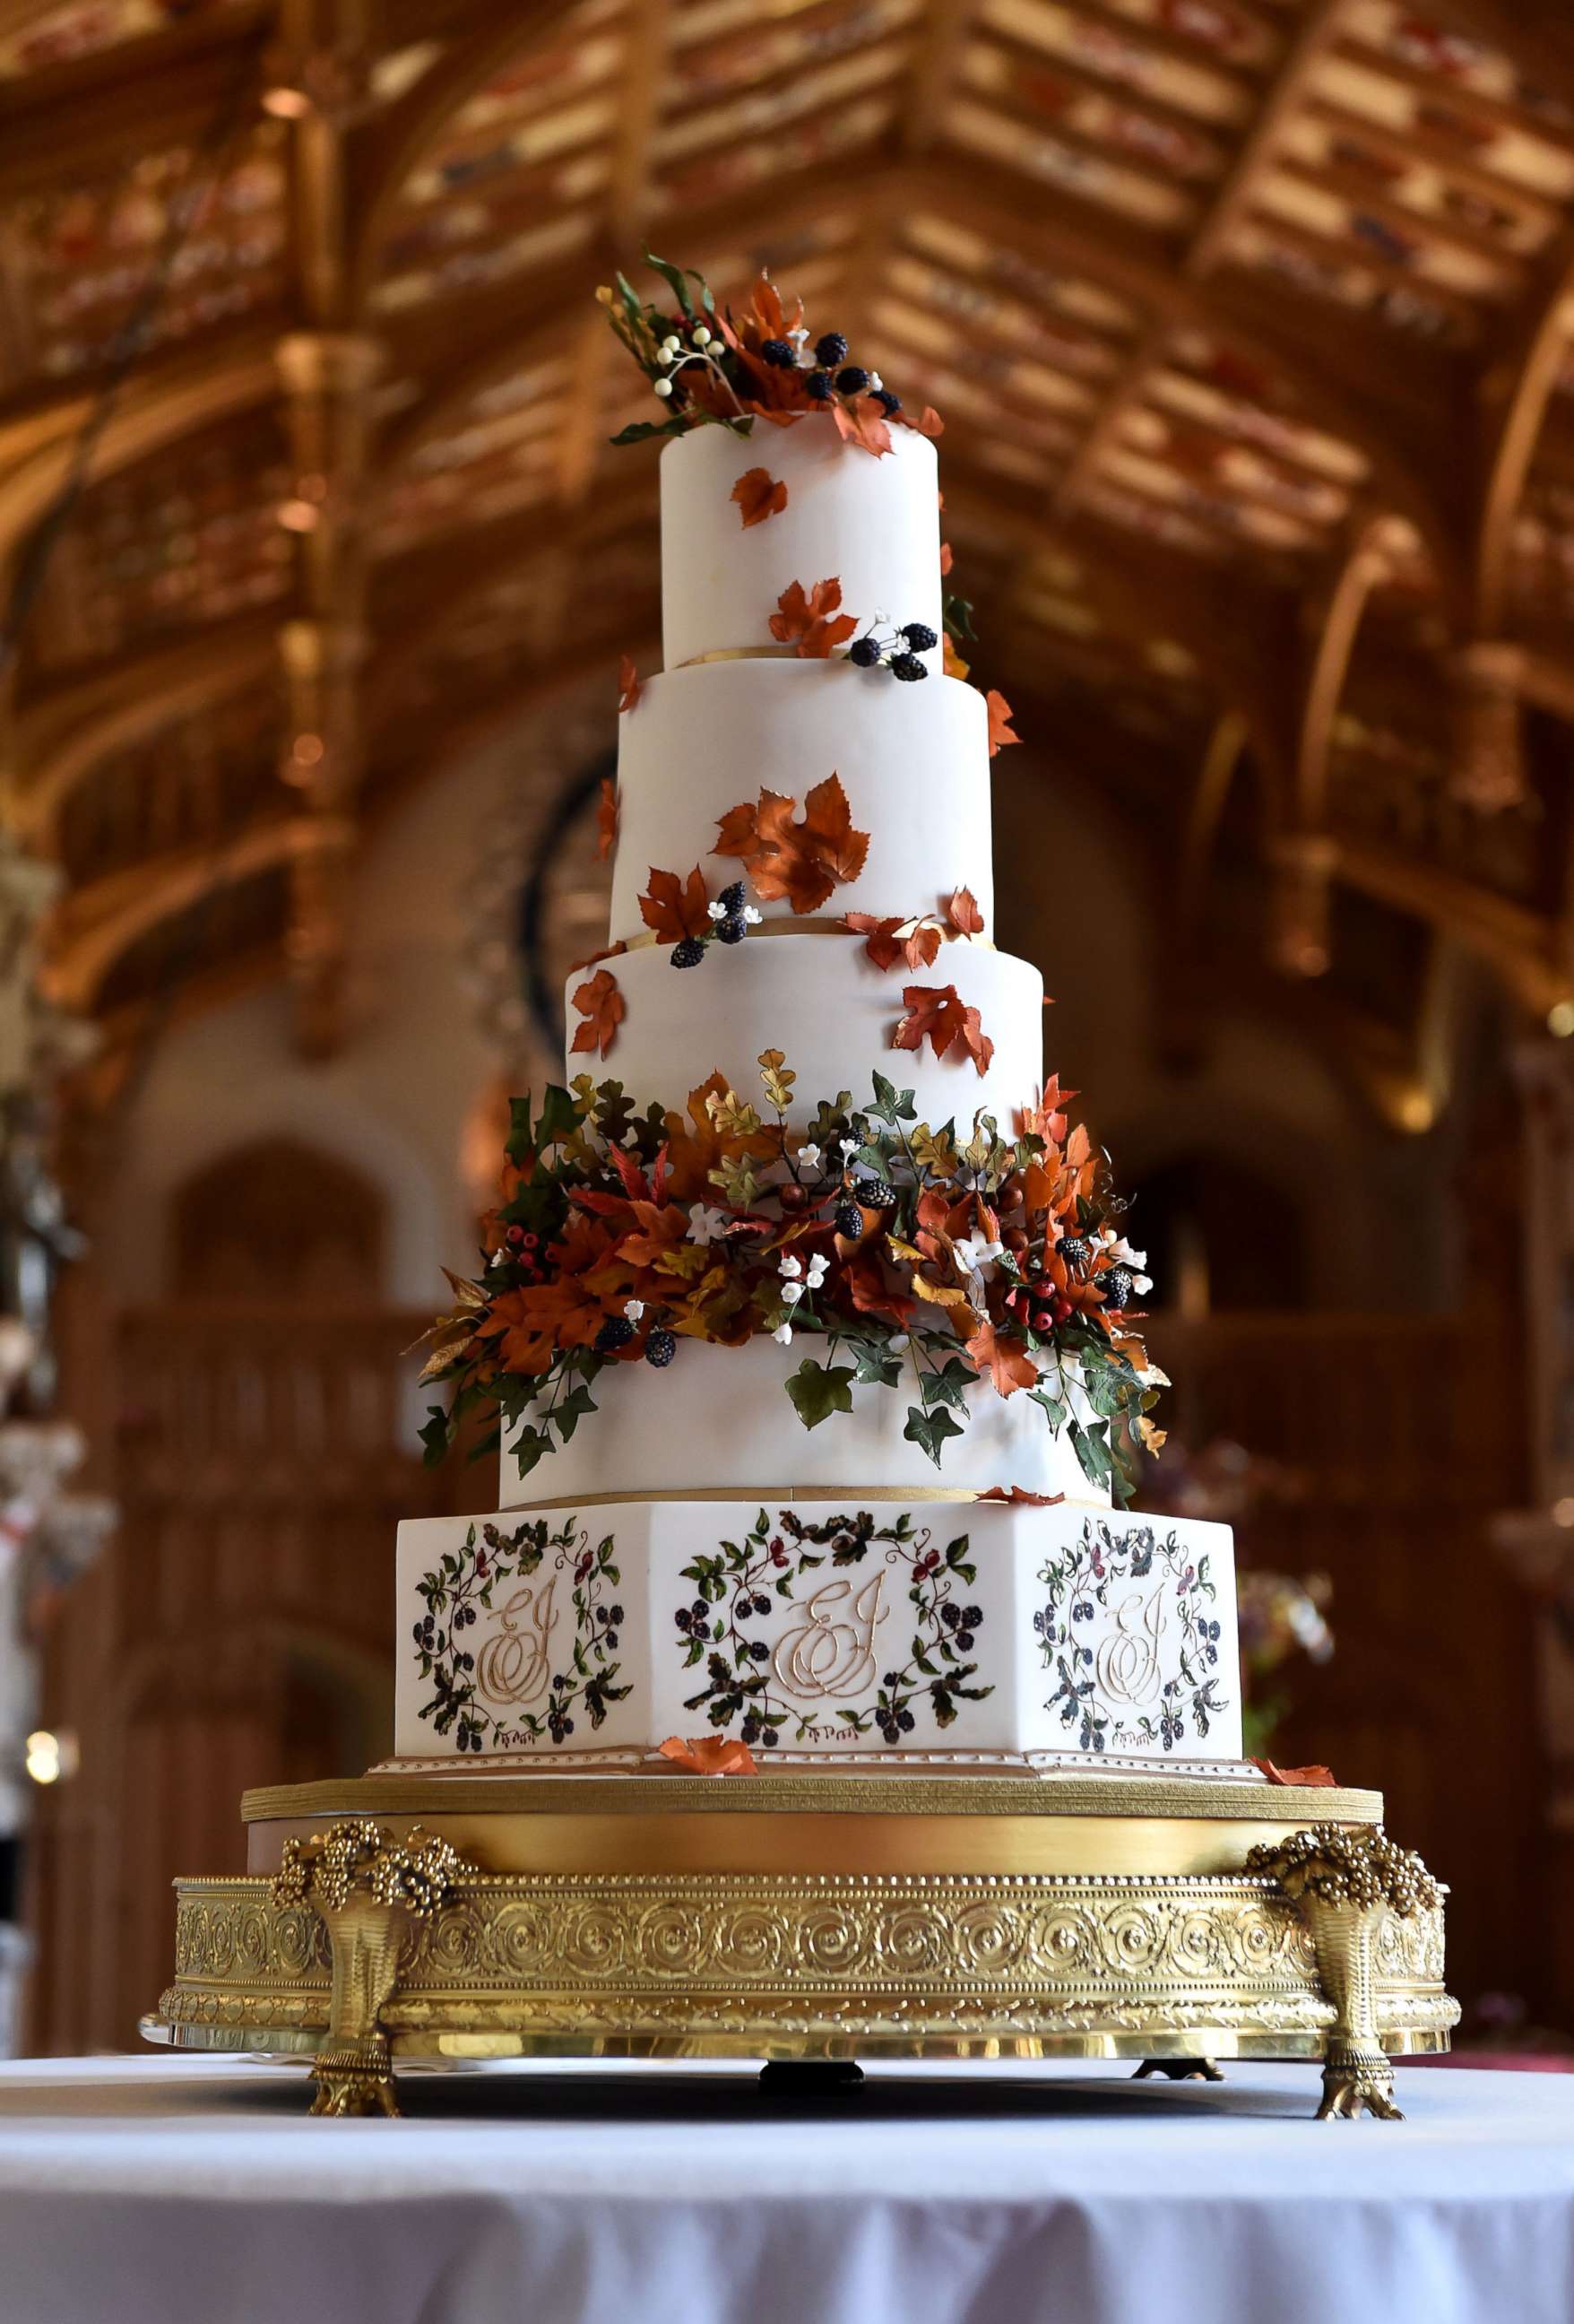 PHOTO: The wedding cake, which was created Sophie Cabot for the wedding of Princess Eugenie of York and Mr. Jack Brooksbank pictured in St. George's Hall at Windsor Castle, Oct. 12, 2018, in Windsor, England.